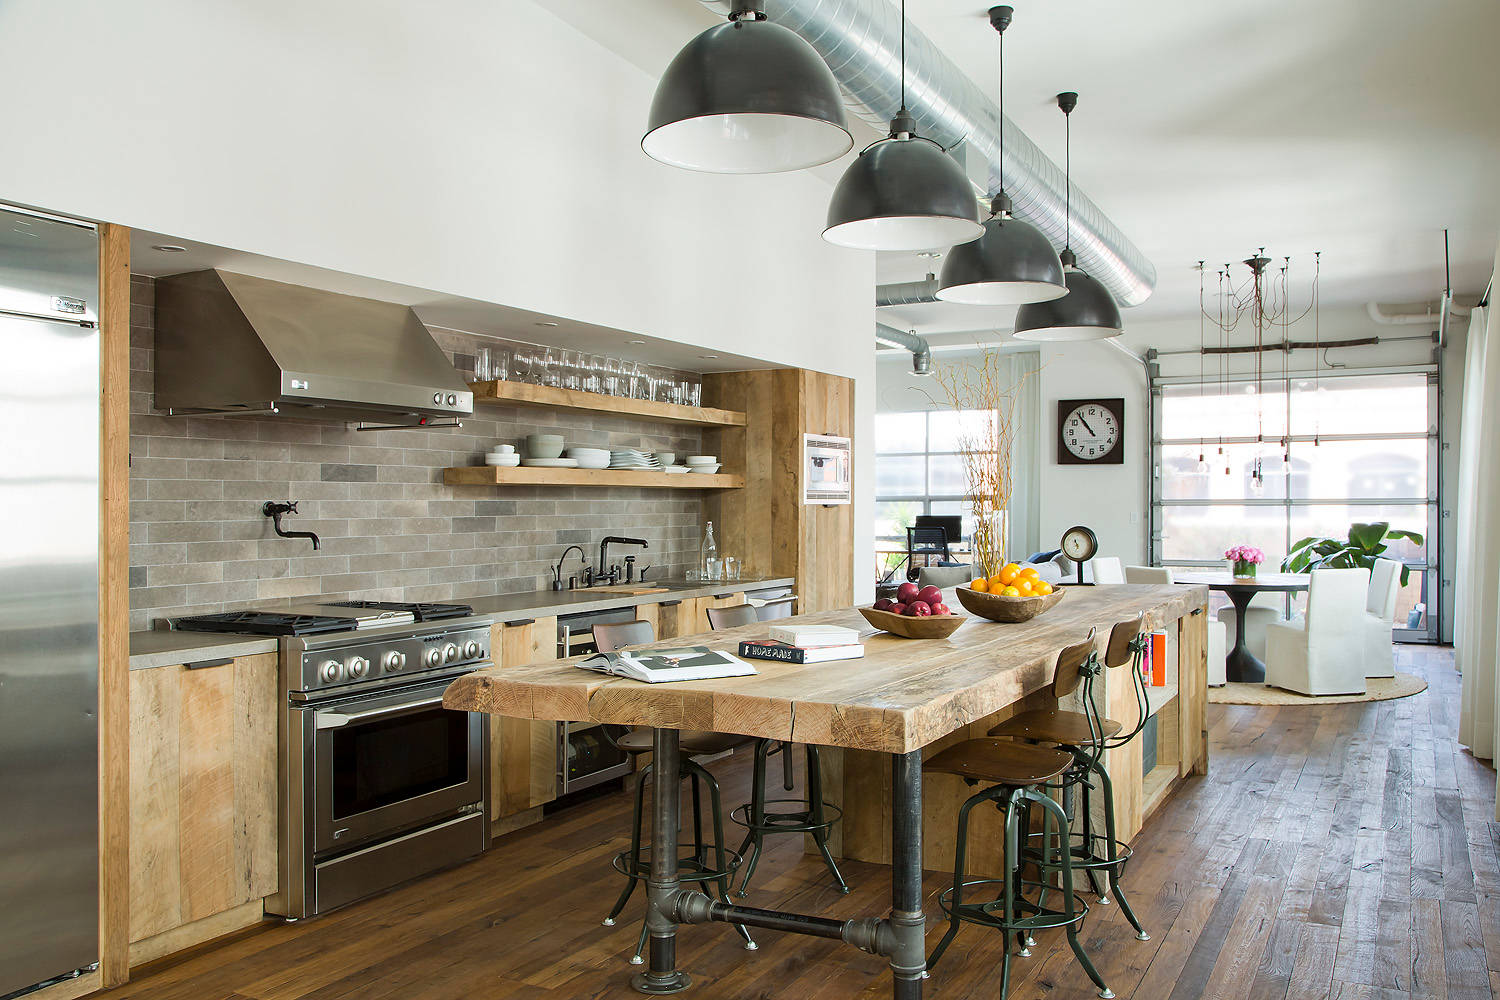 18 Industrial Kitchen Ideas You'll Love   October, 18   Houzz